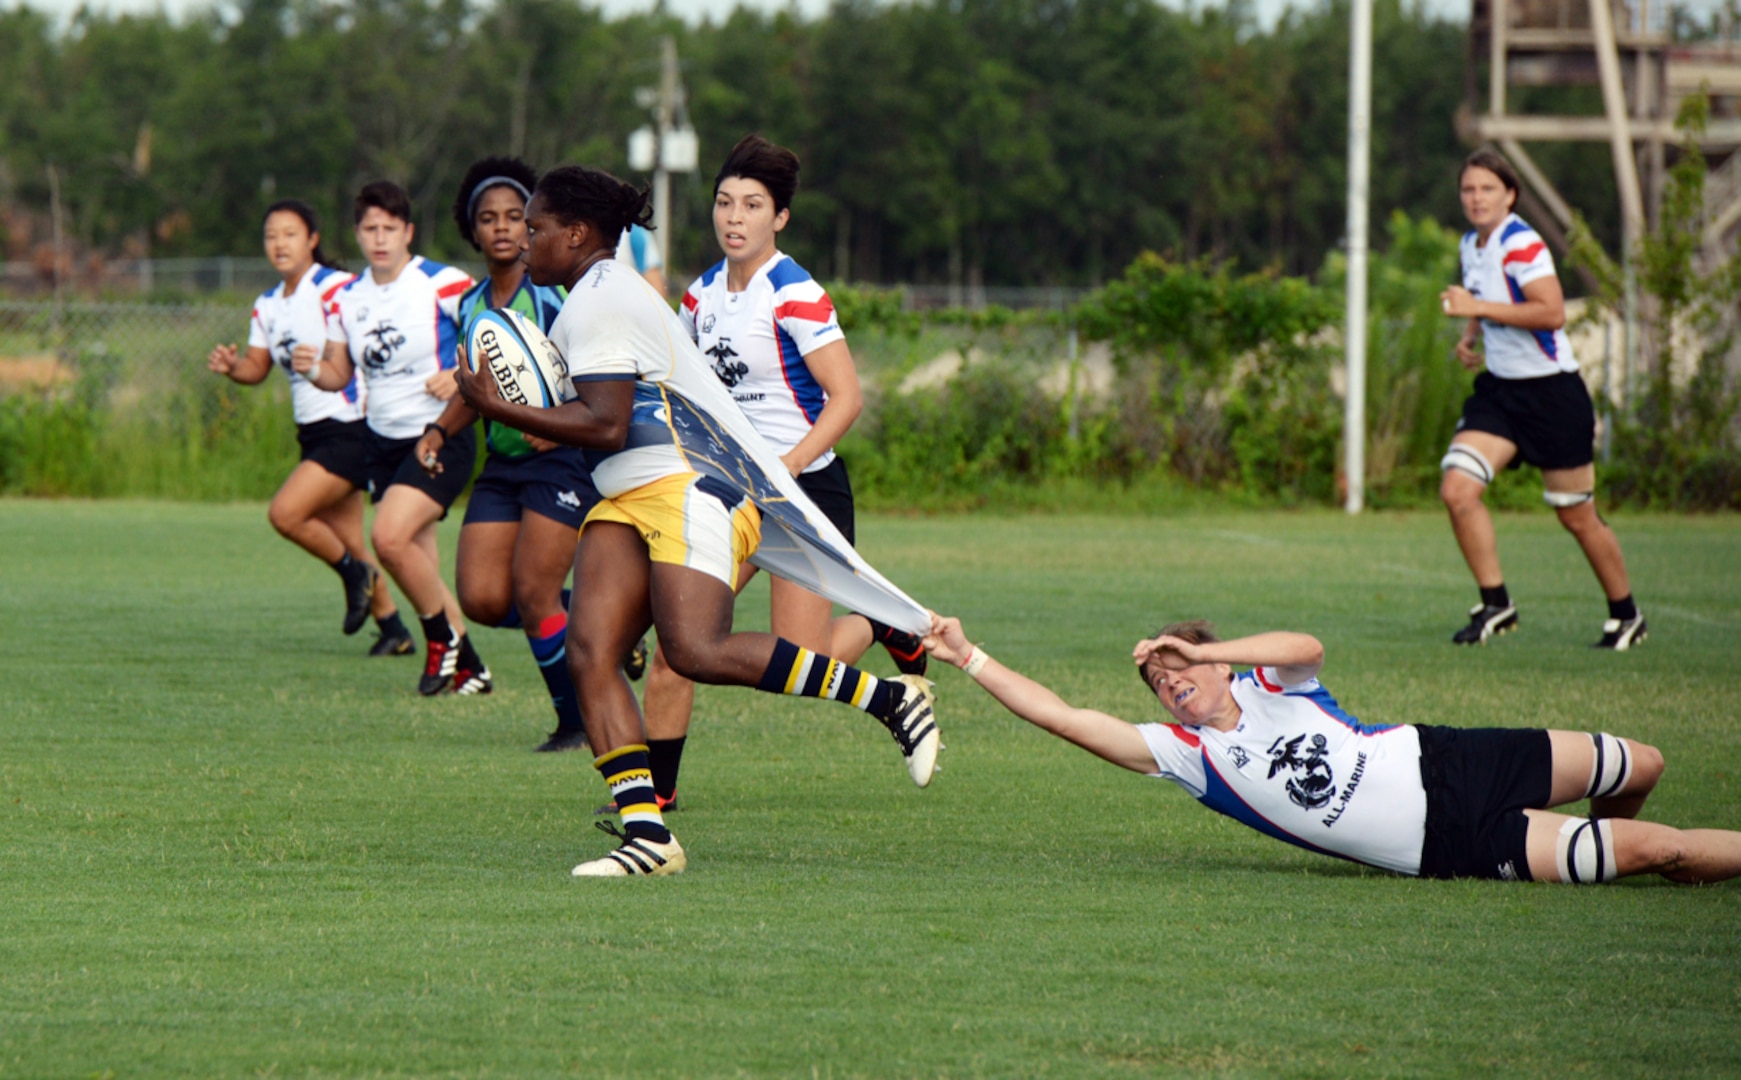 WILMINGTON, N.C. (June 6, 2019) -- Navy faces off against Marine Corps on day two of the inaugural Armed Forces Women's Rugby Championship held in Wilmington, N.C. July 5-7, 2019. This historic event features the best female rugby players from the Army, Marine Corps, Navy, Air Force, and Coast Guard, who will compete for the title of the first ever Women's Rugby Champs (U.S. Dept. of Defense photo by Chief Mass Communication Specialist Patrick Gordon/RELEASED)